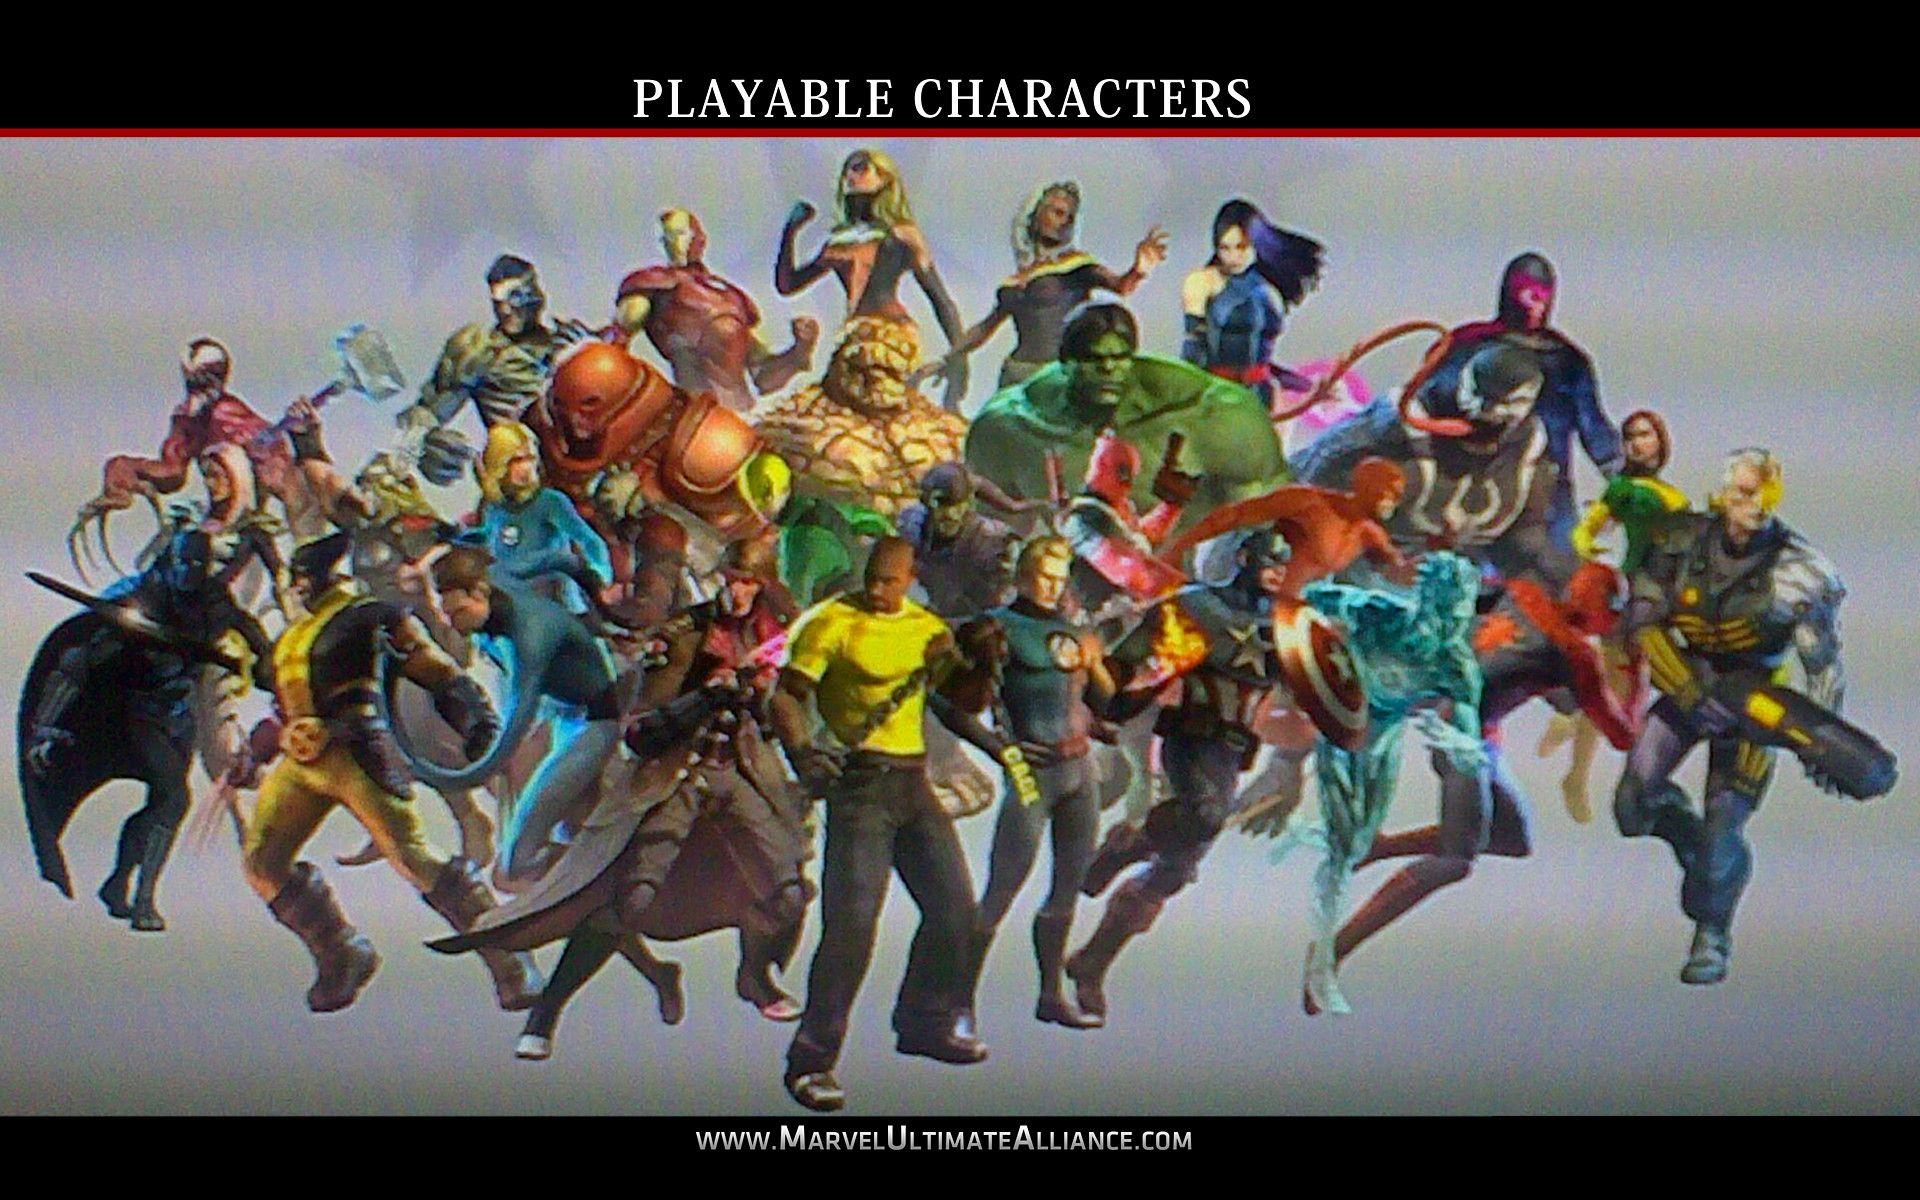 Marvel ultimate alliance 2 characters unlock ps3 - chafornali’s diary